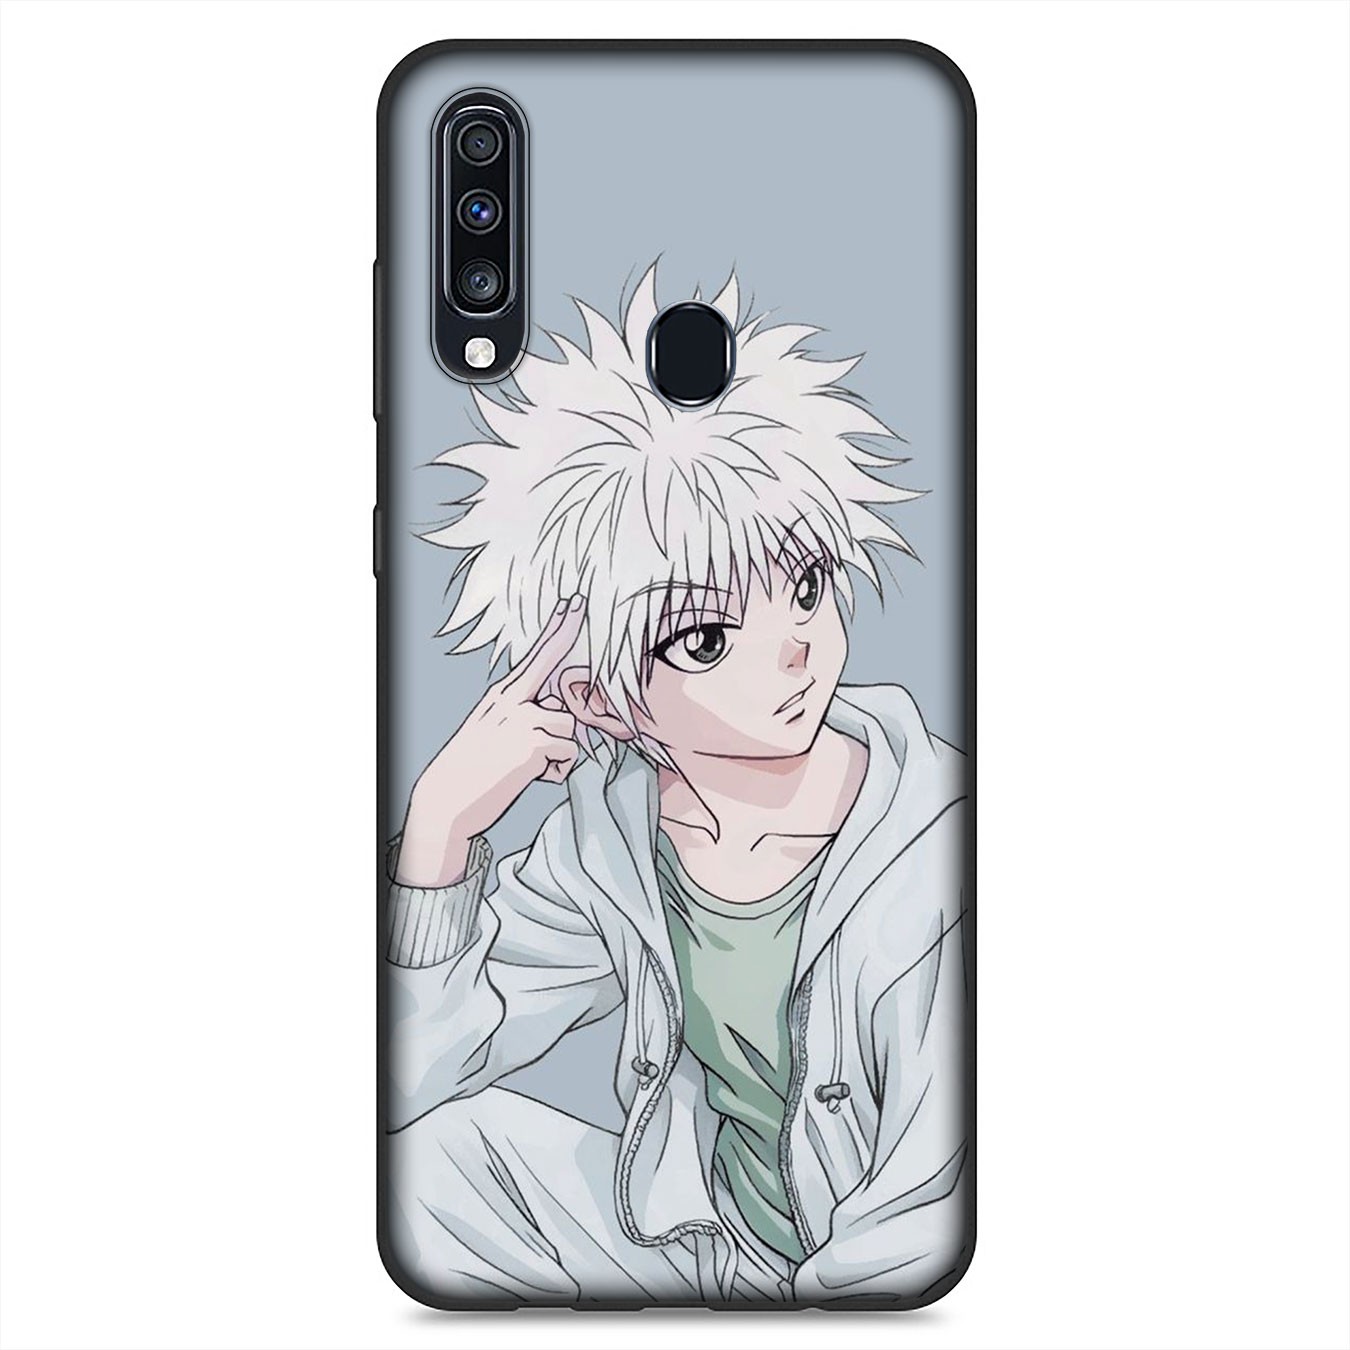 Samsung Galaxy S21 Ultra S8 Plus F62 M62 A2 A32 A52 A72 S21+ S8+ S21Plus Casing Soft Silicone Phone Case Hunter × Hunter Cover